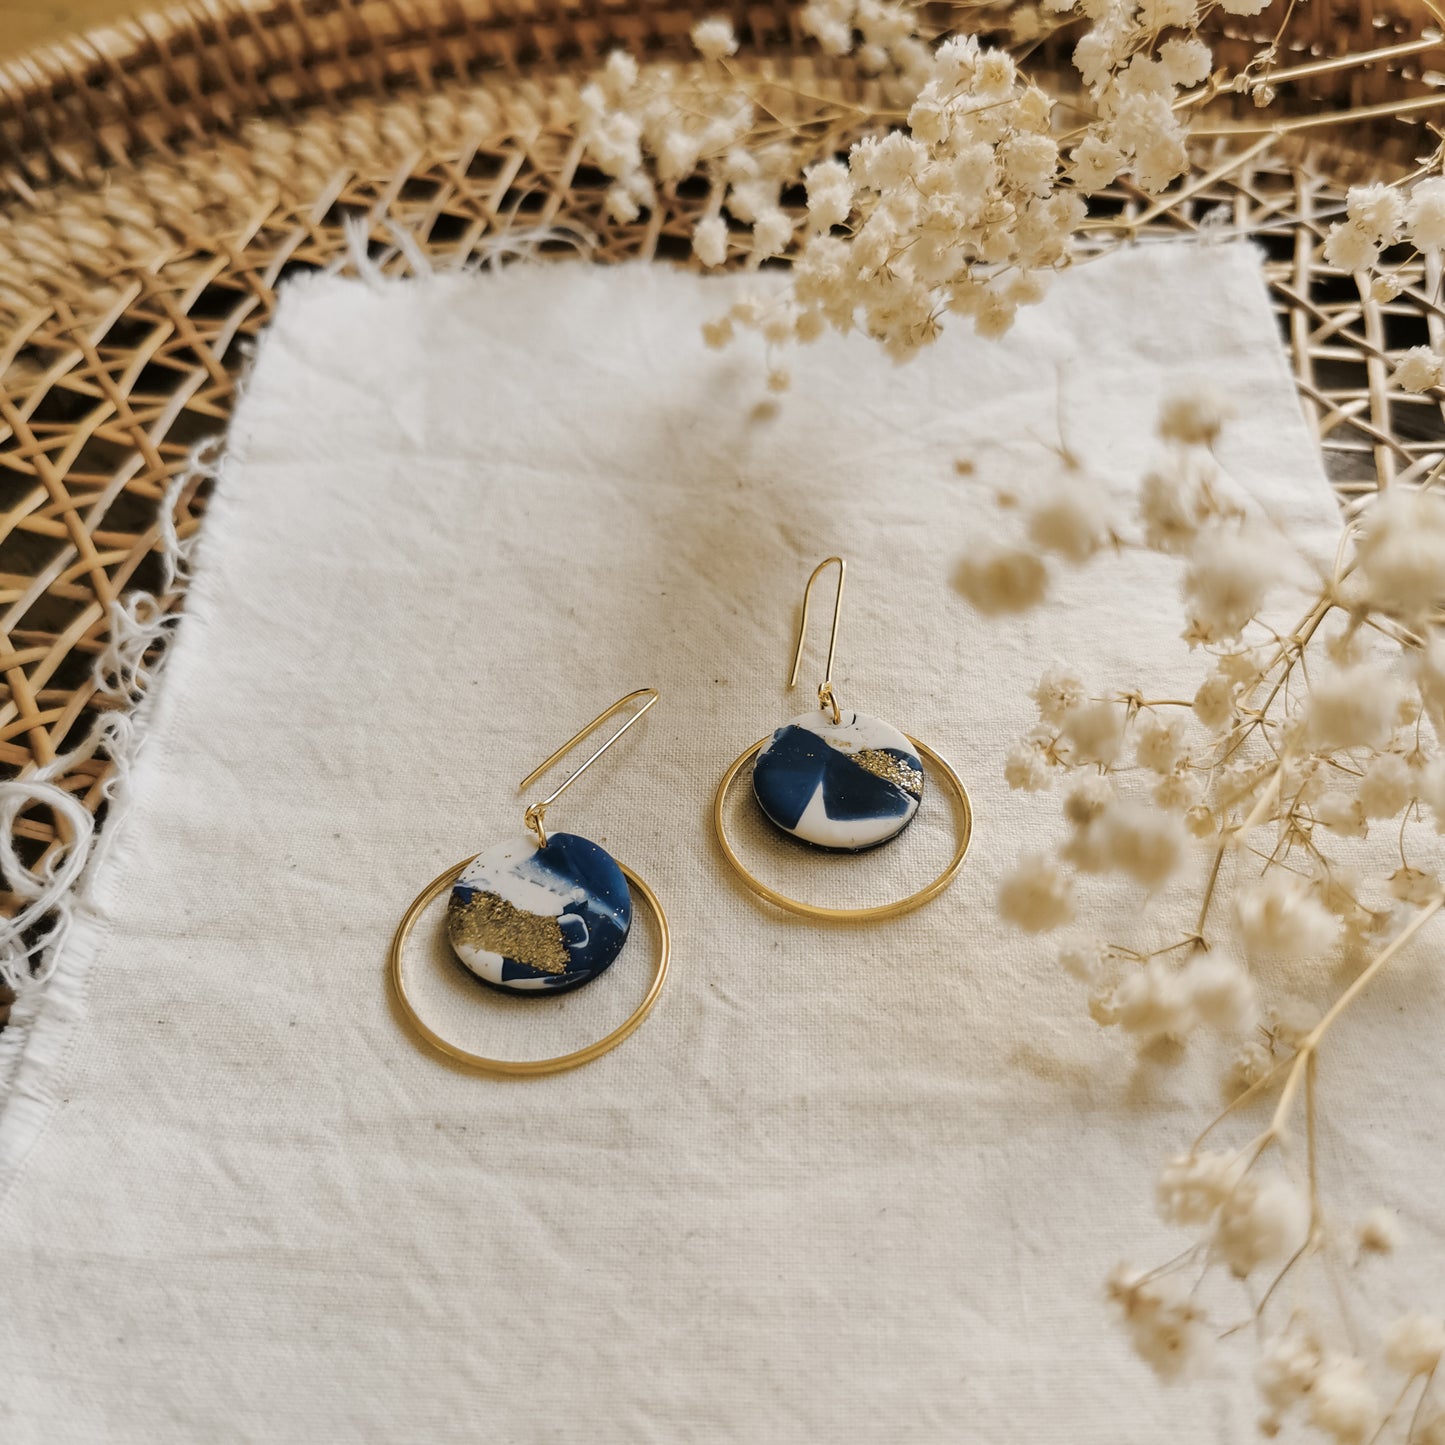 Bryluen Round | round hoop with circle detail long drop earrings in abstract mussel shell blue with gold